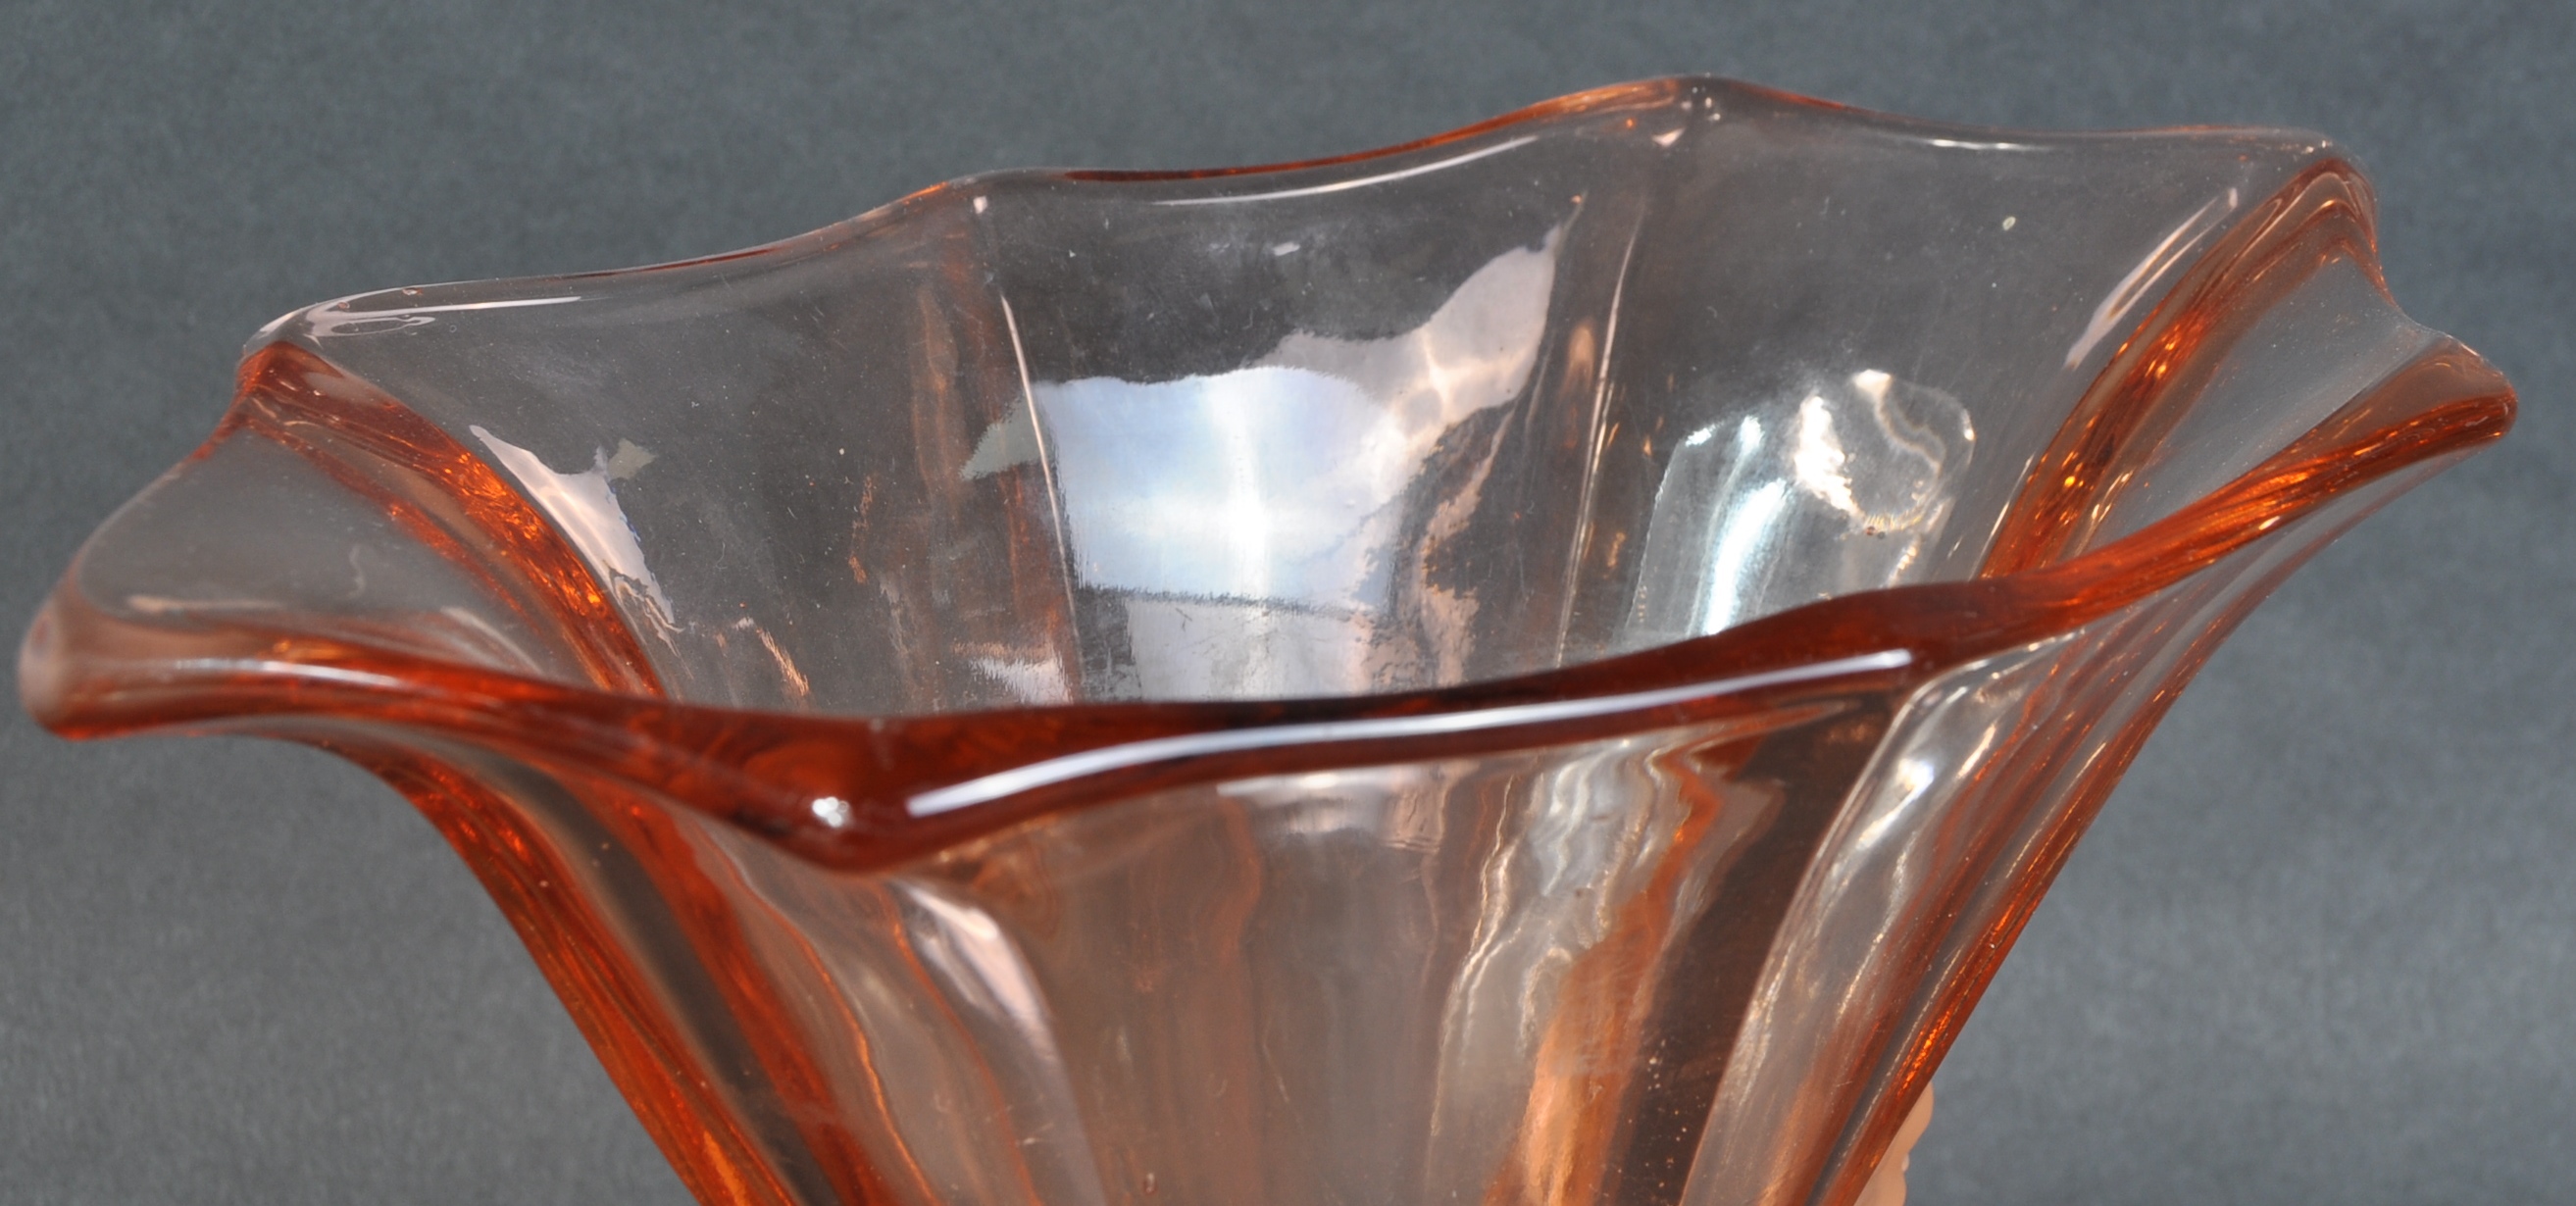 WALTHER & SOHNE - VINTAGE ART DECO PEACH GLASS VASE - Image 3 of 6